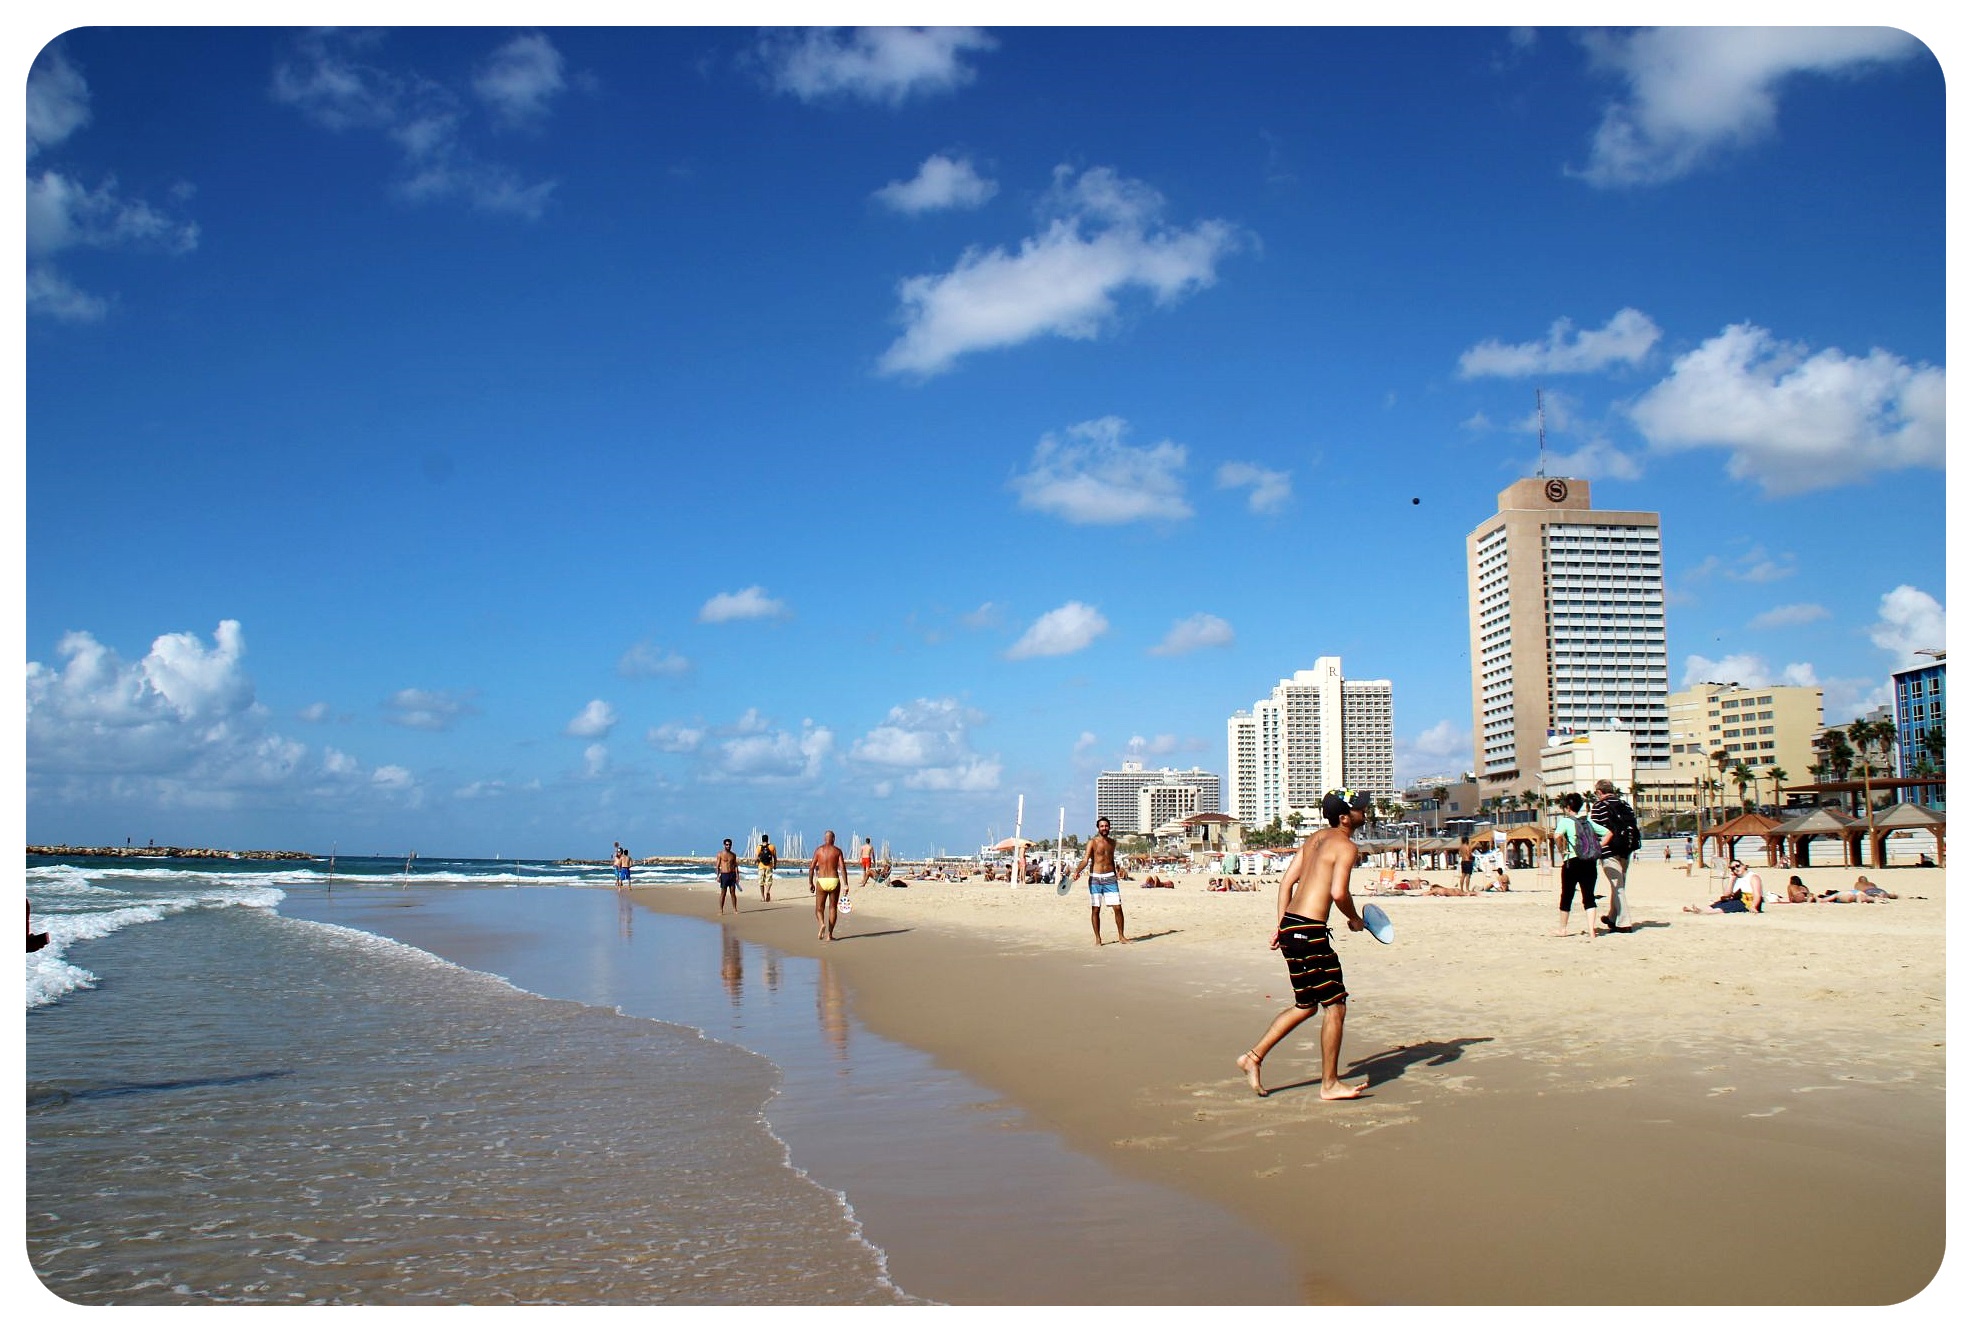 Travel Challenge: Is it possible to visit Tel Aviv on a budget?